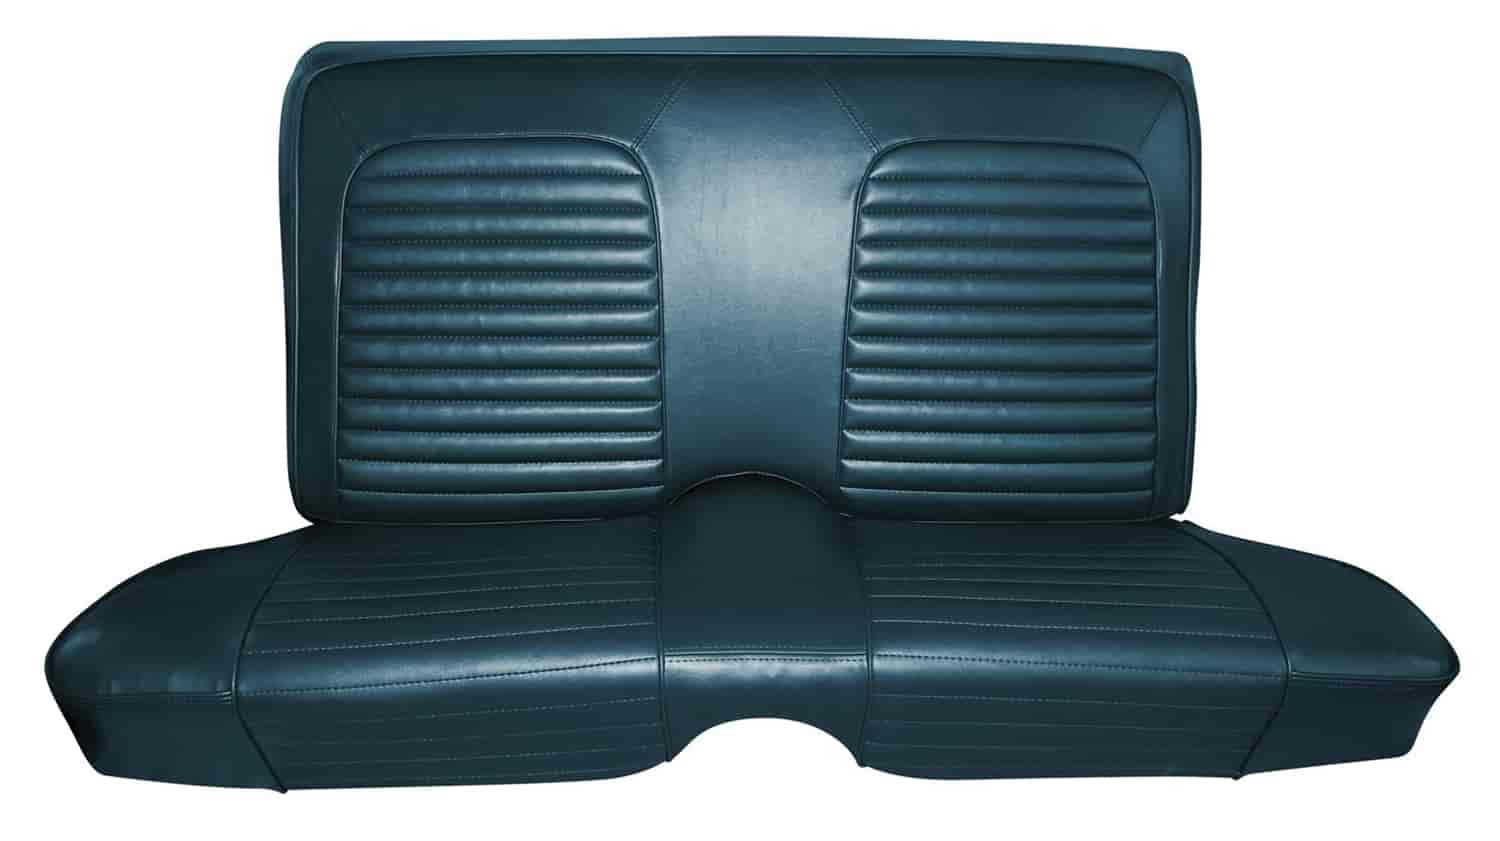 1964 Ford Falcon Futura 2-Door Hardtop Two-Tone Deluxe Interior Front and Rear Bench Seat Upholstery Set